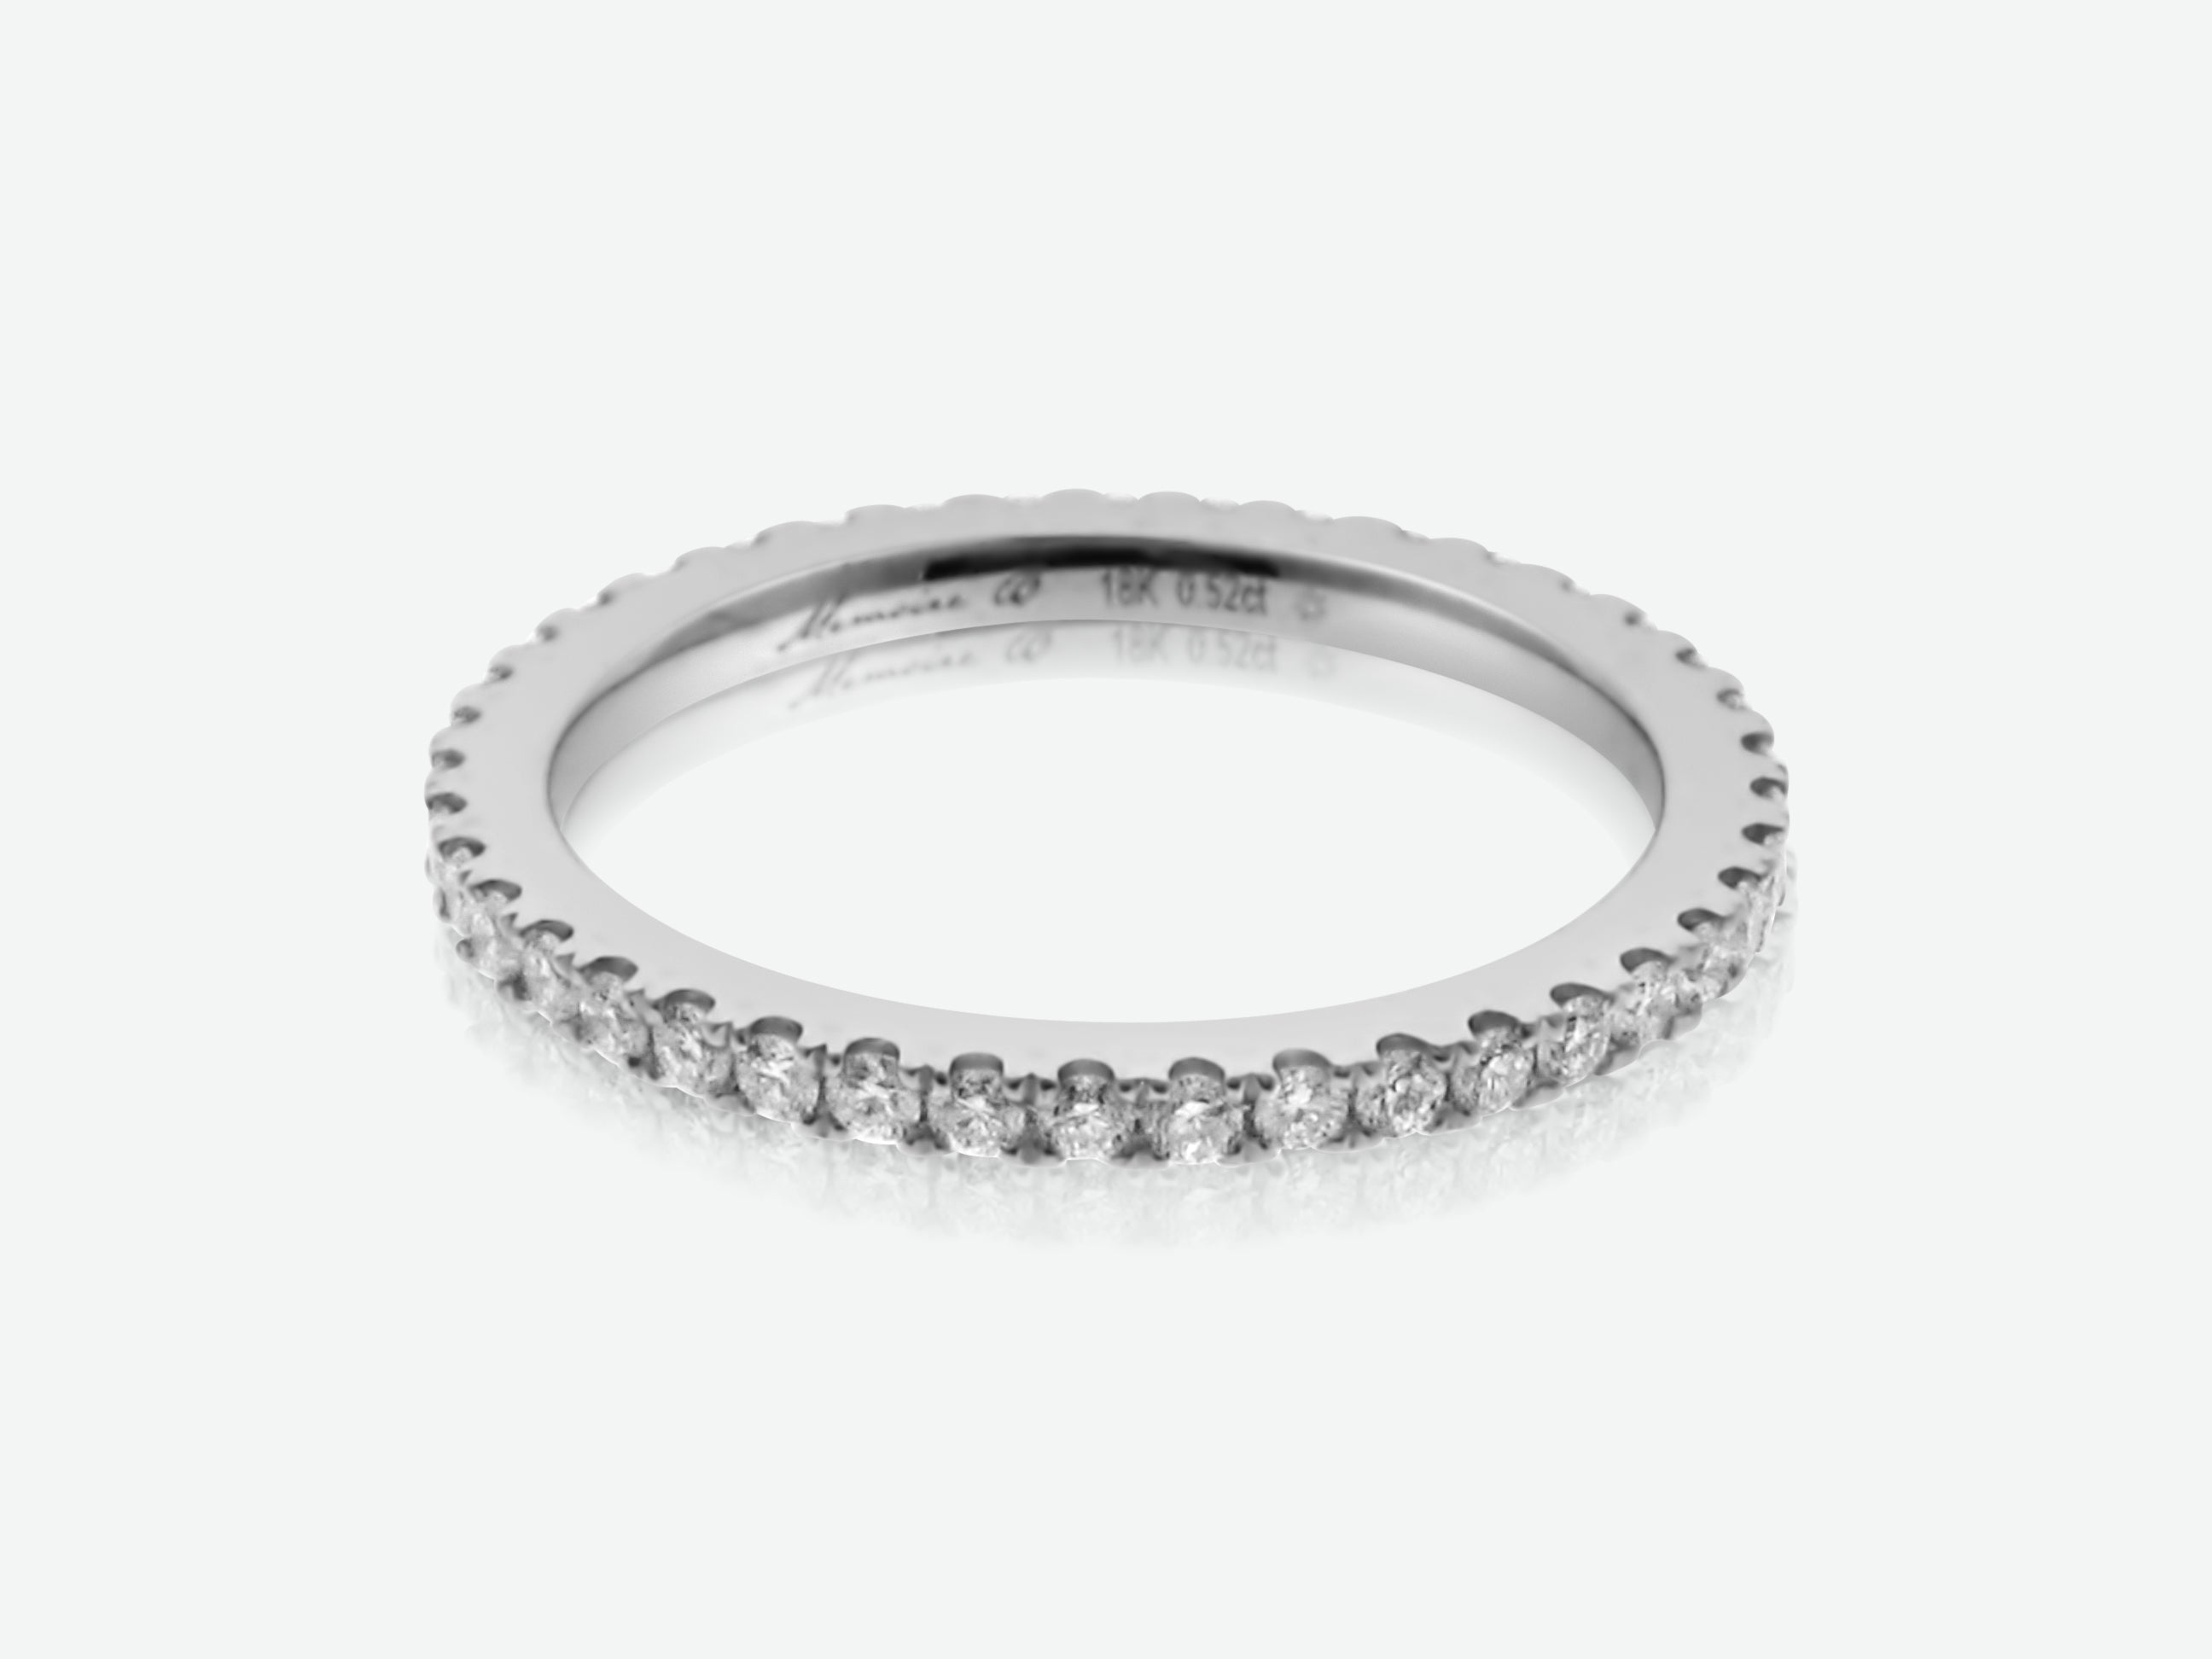 MEMOIRE 18K WHITE GOLD 0.50CT SI/G DIAMOND ETERNITY BAND FROM THE BOUQUET COLLECTION